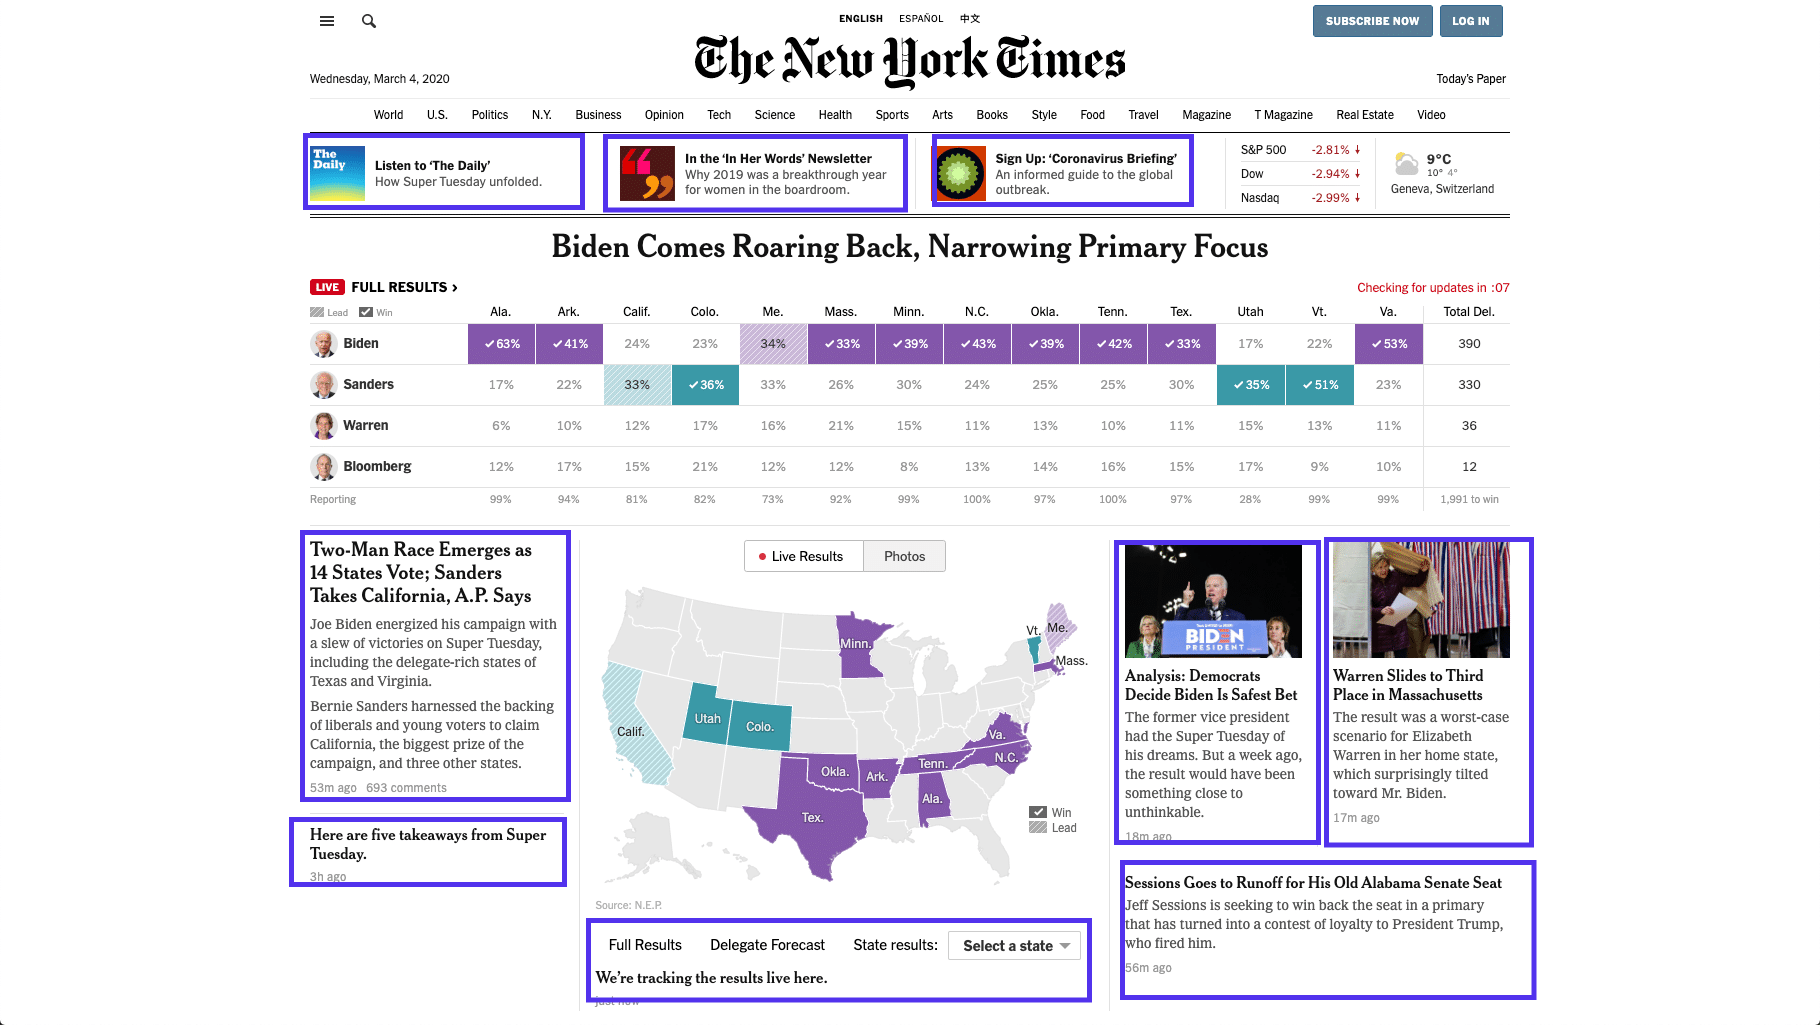 NYT's content layout